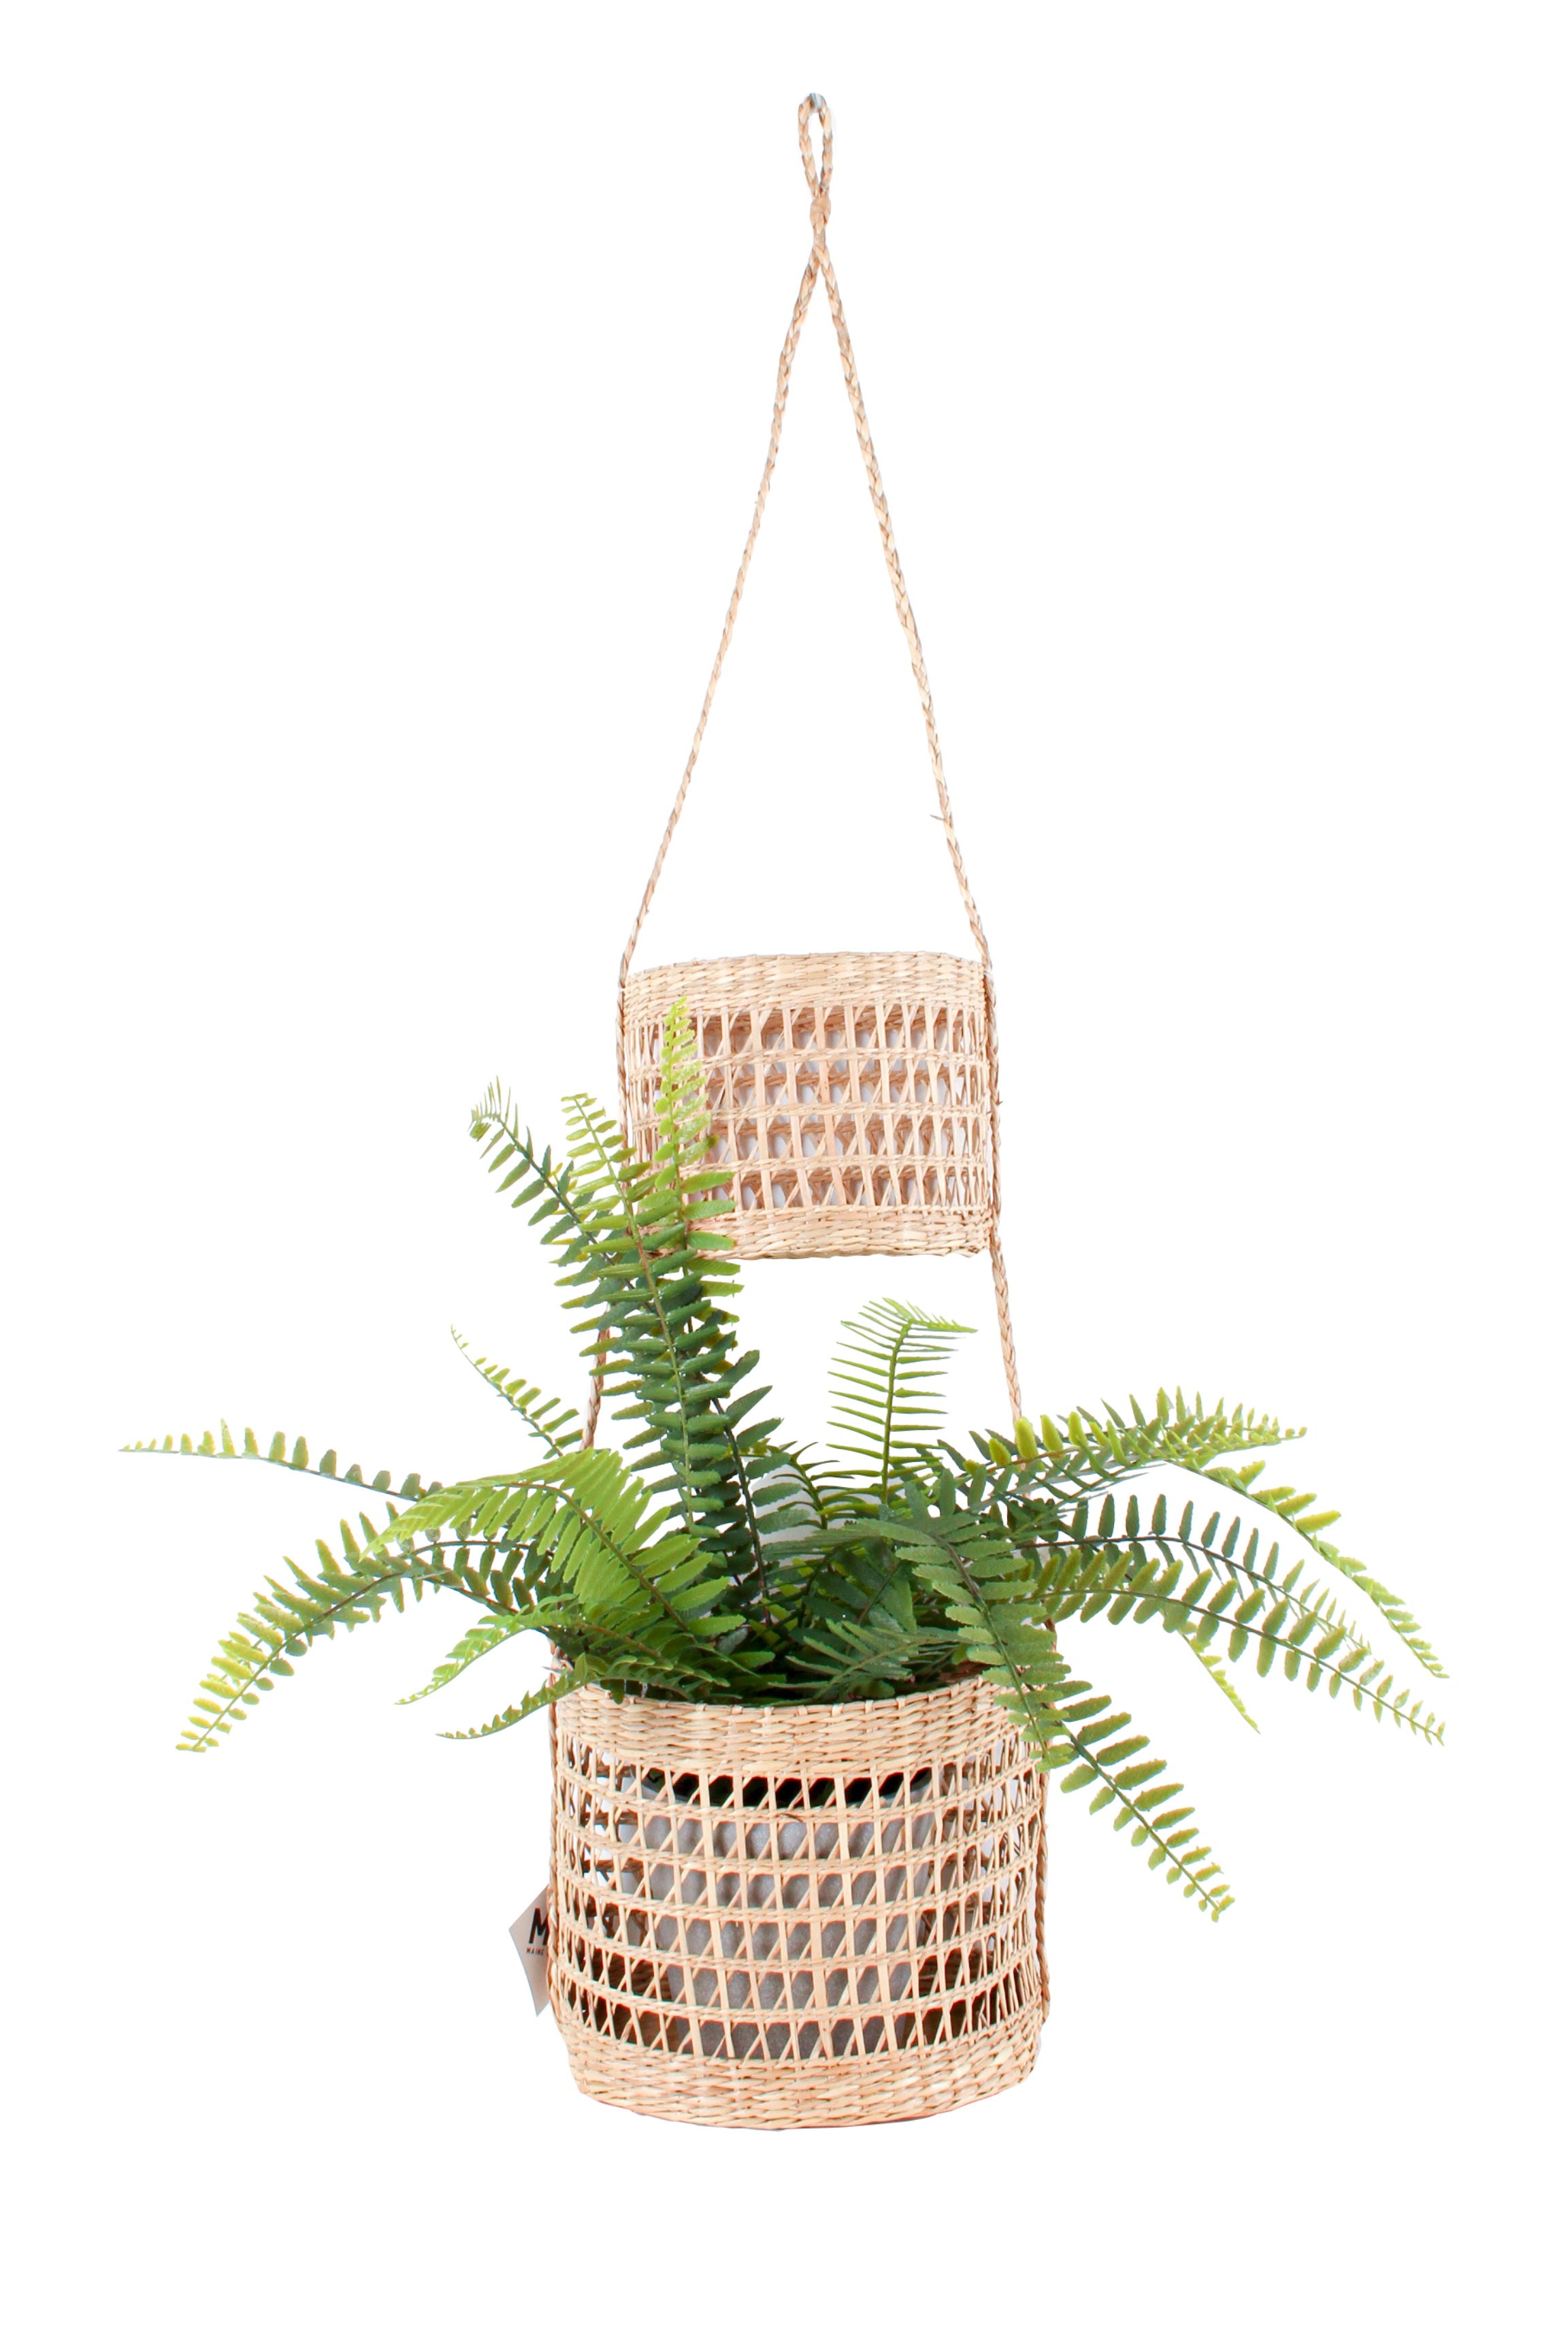 GYMPIE 2 TIER SEAGRASS HANGING BASKET